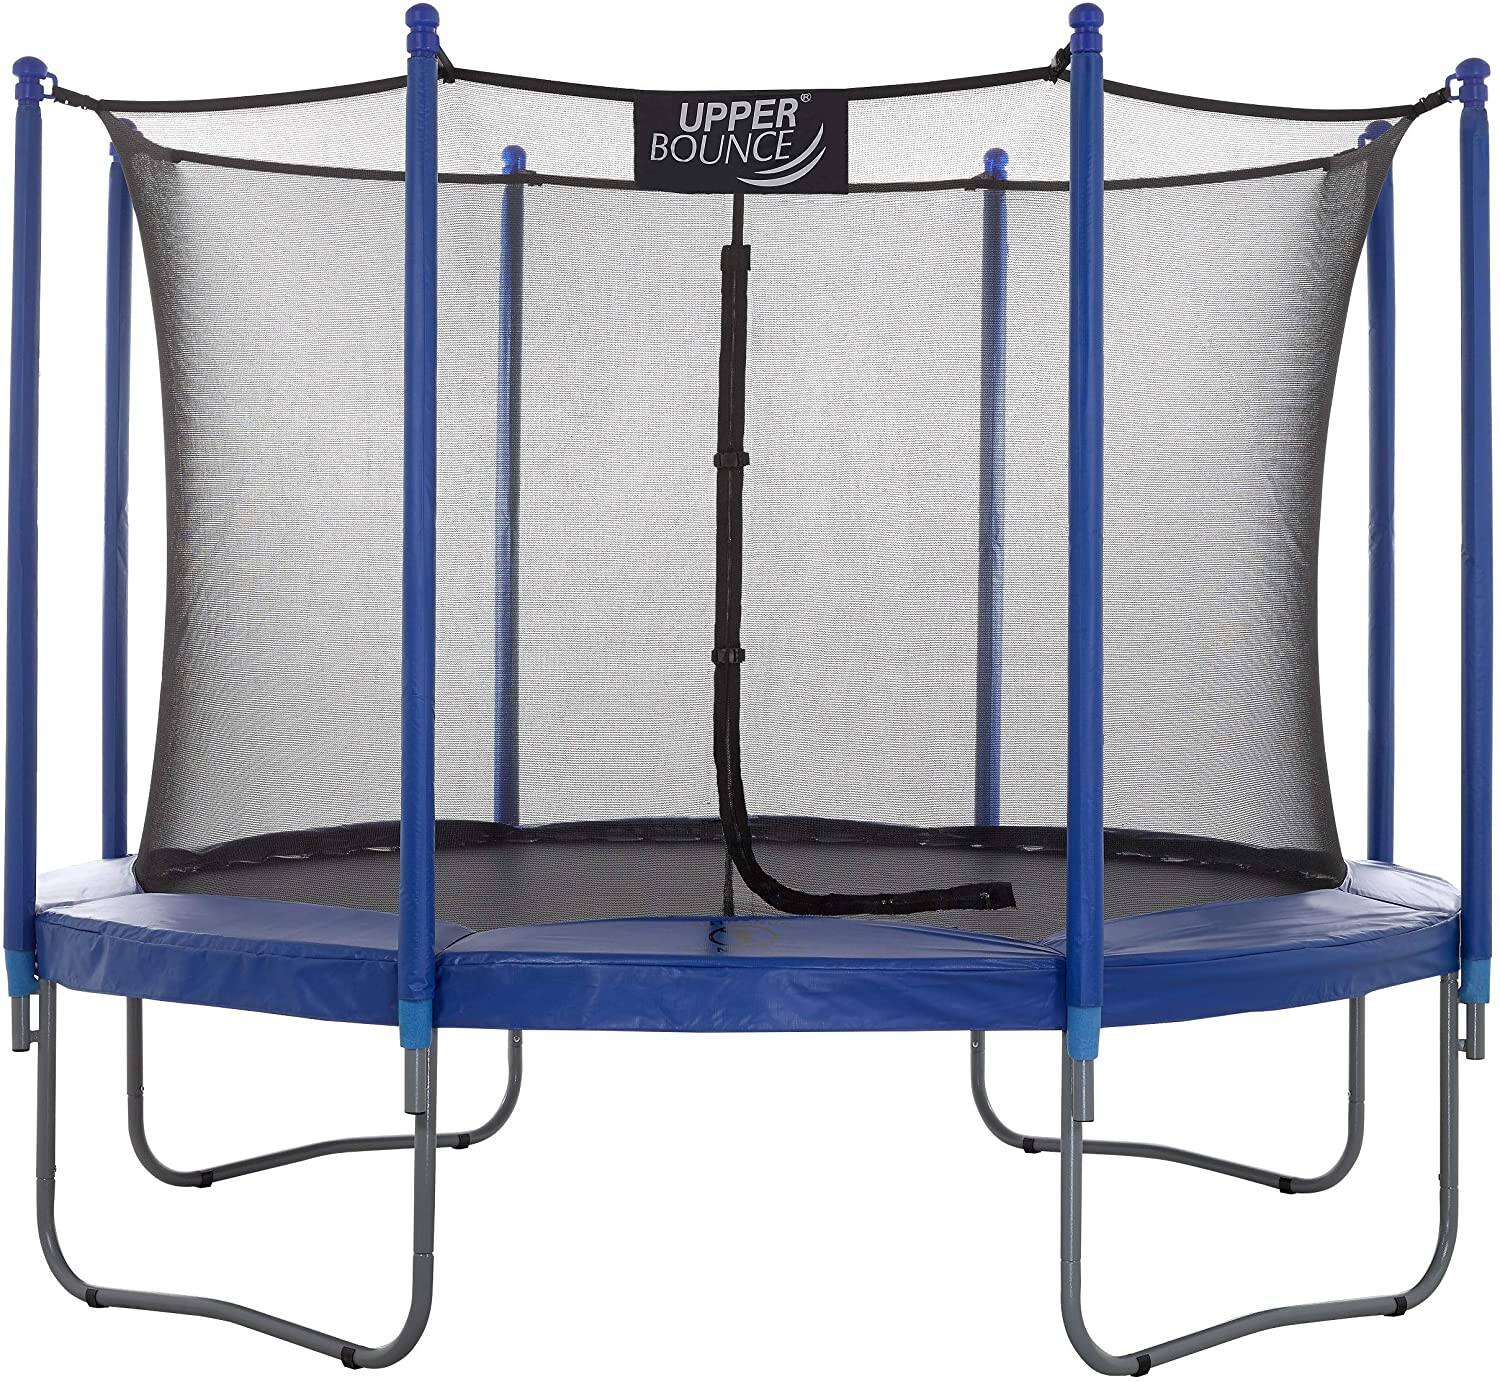 15' Upper Bounce Enclosed Trampoline with Safety Net System – Outdoor Trampoline - ASTM Certified $419.99 + Free Shipping